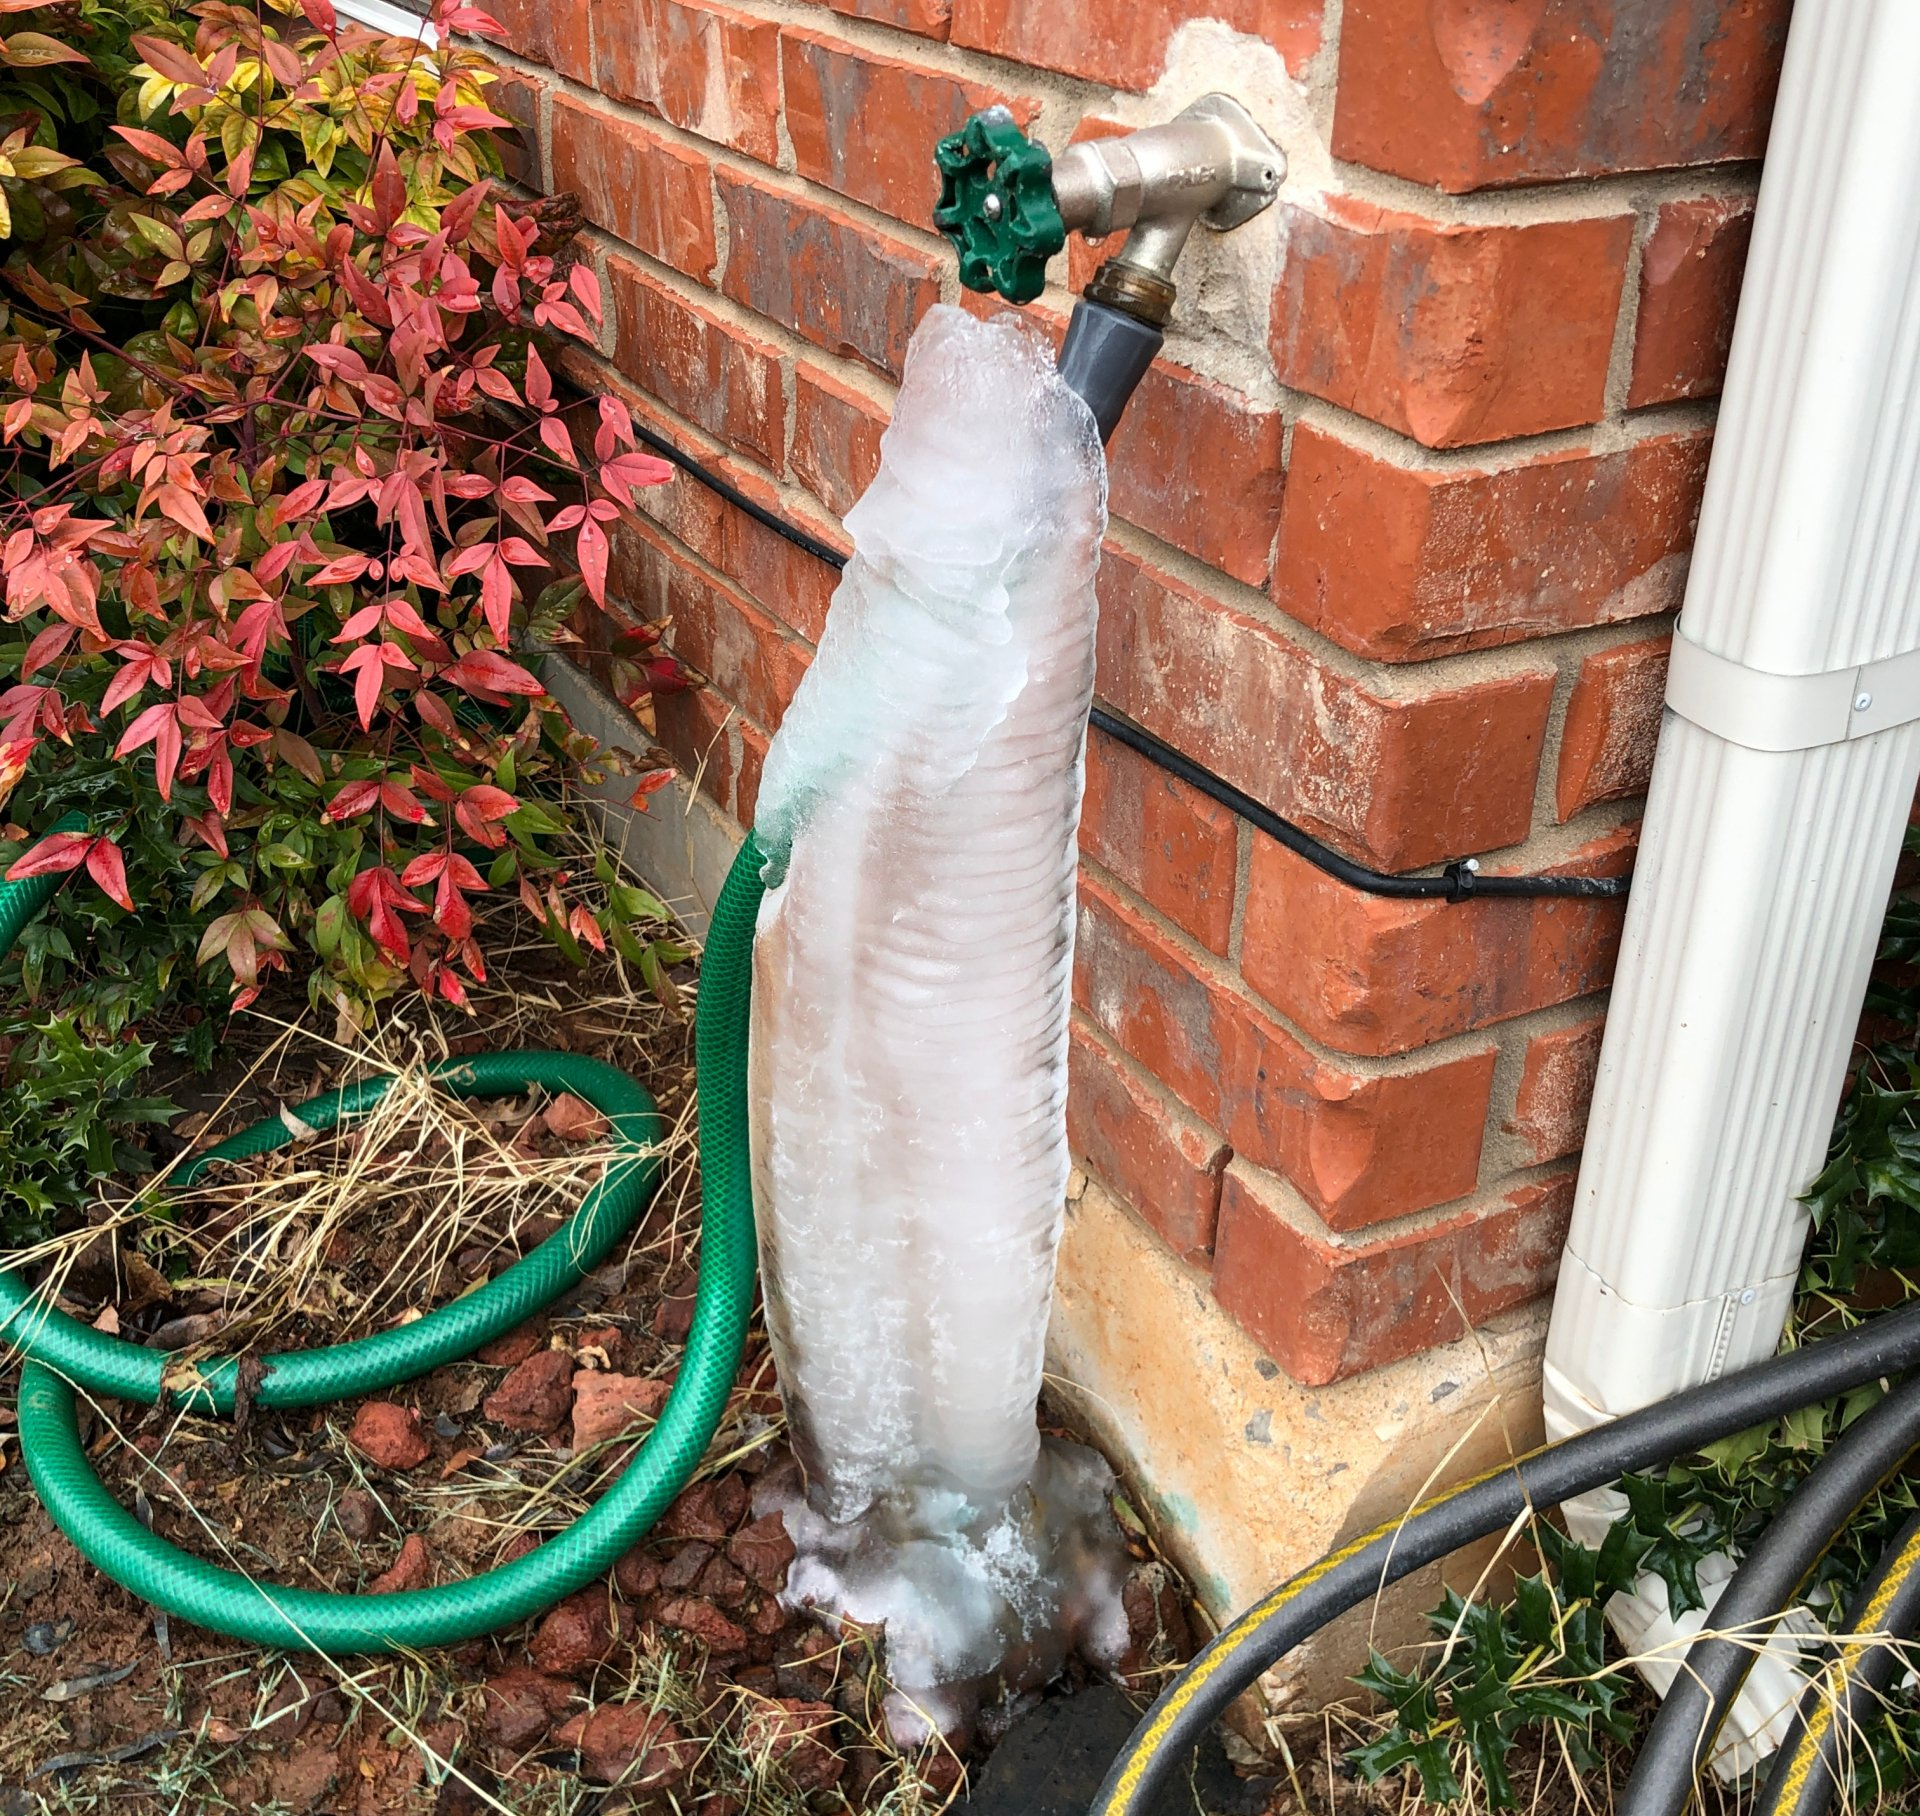 Make sure your plumbing is all set for winter!